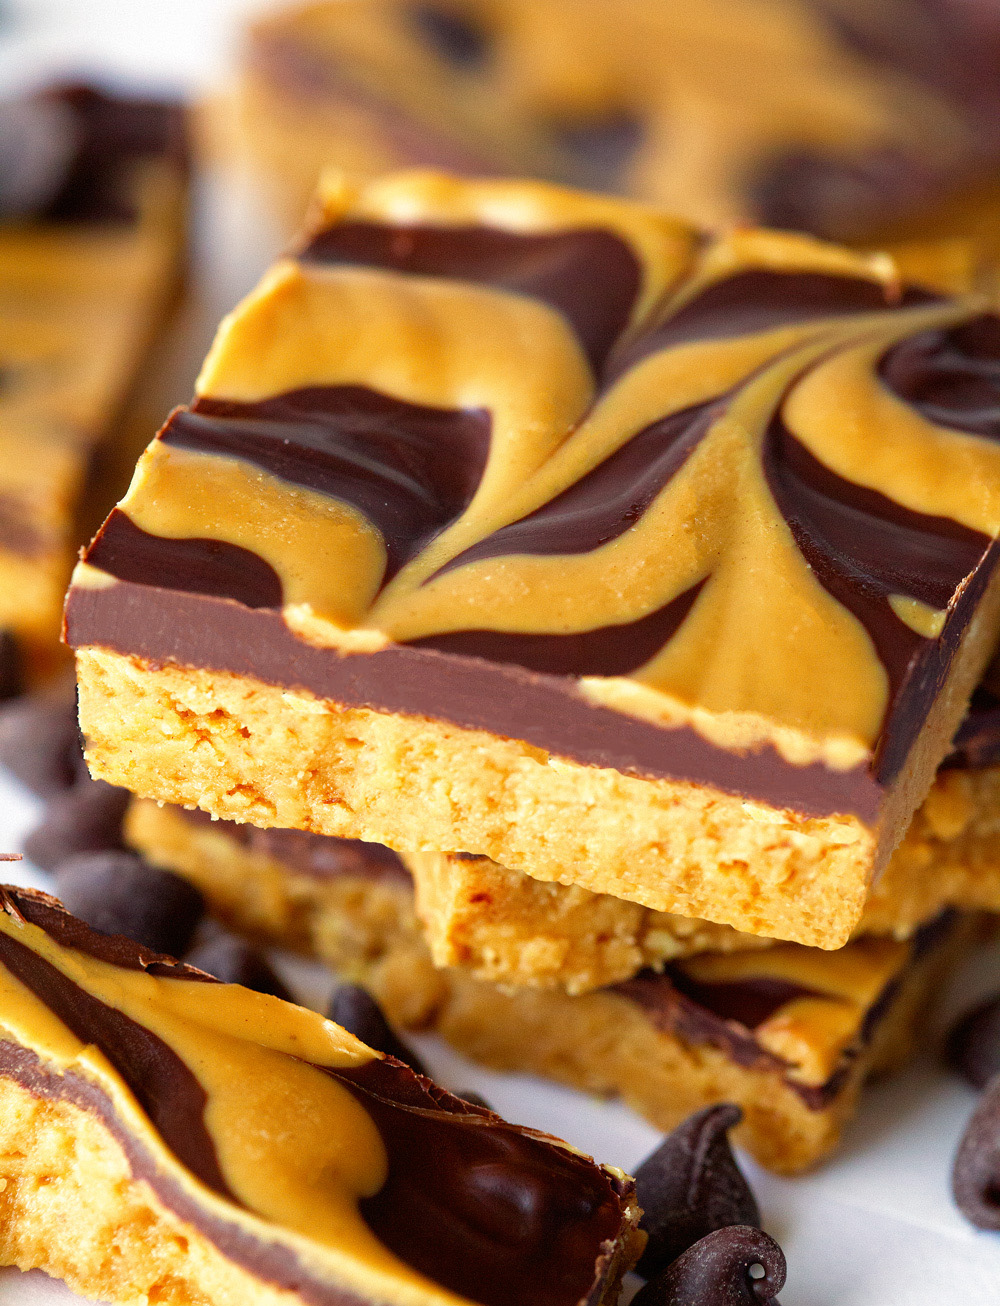 Swirled No-Bake Reeses Peanut Butter Bars by Deliciously Yum!